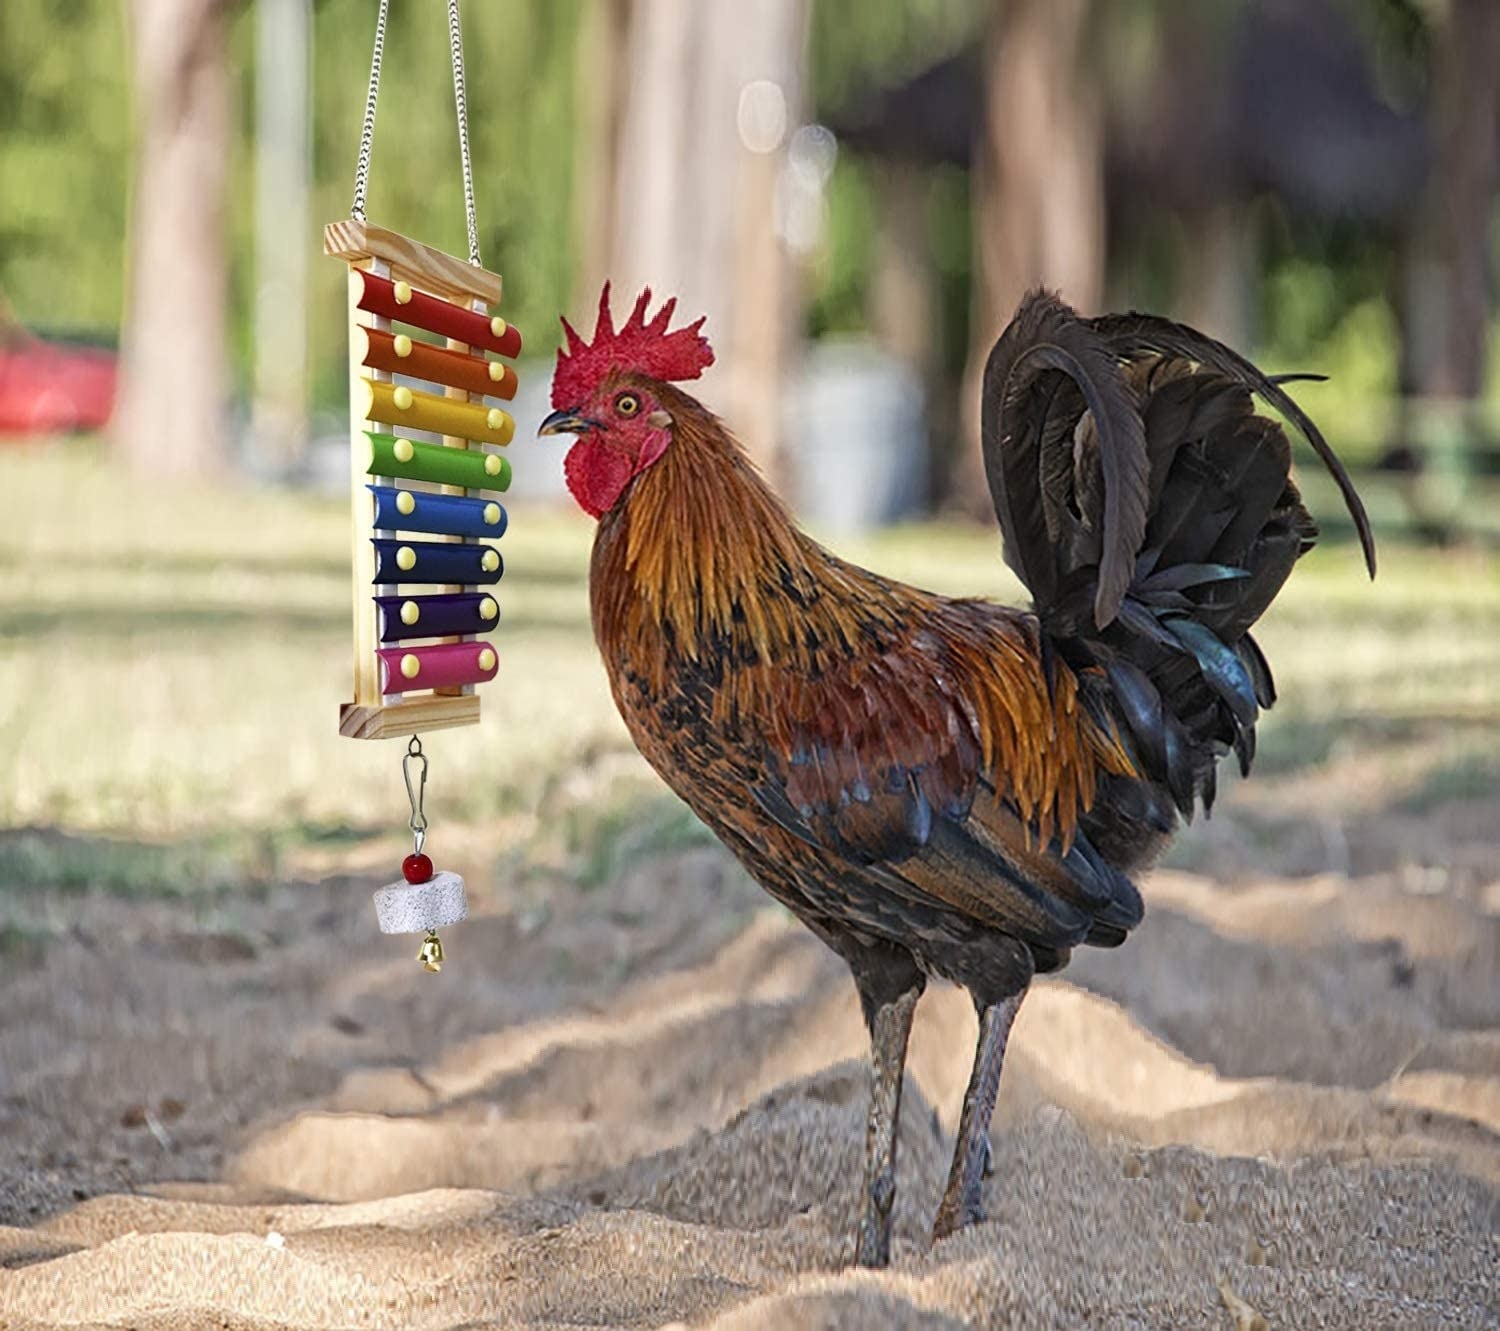 A chicken pecking a hanging colorful xylophone 